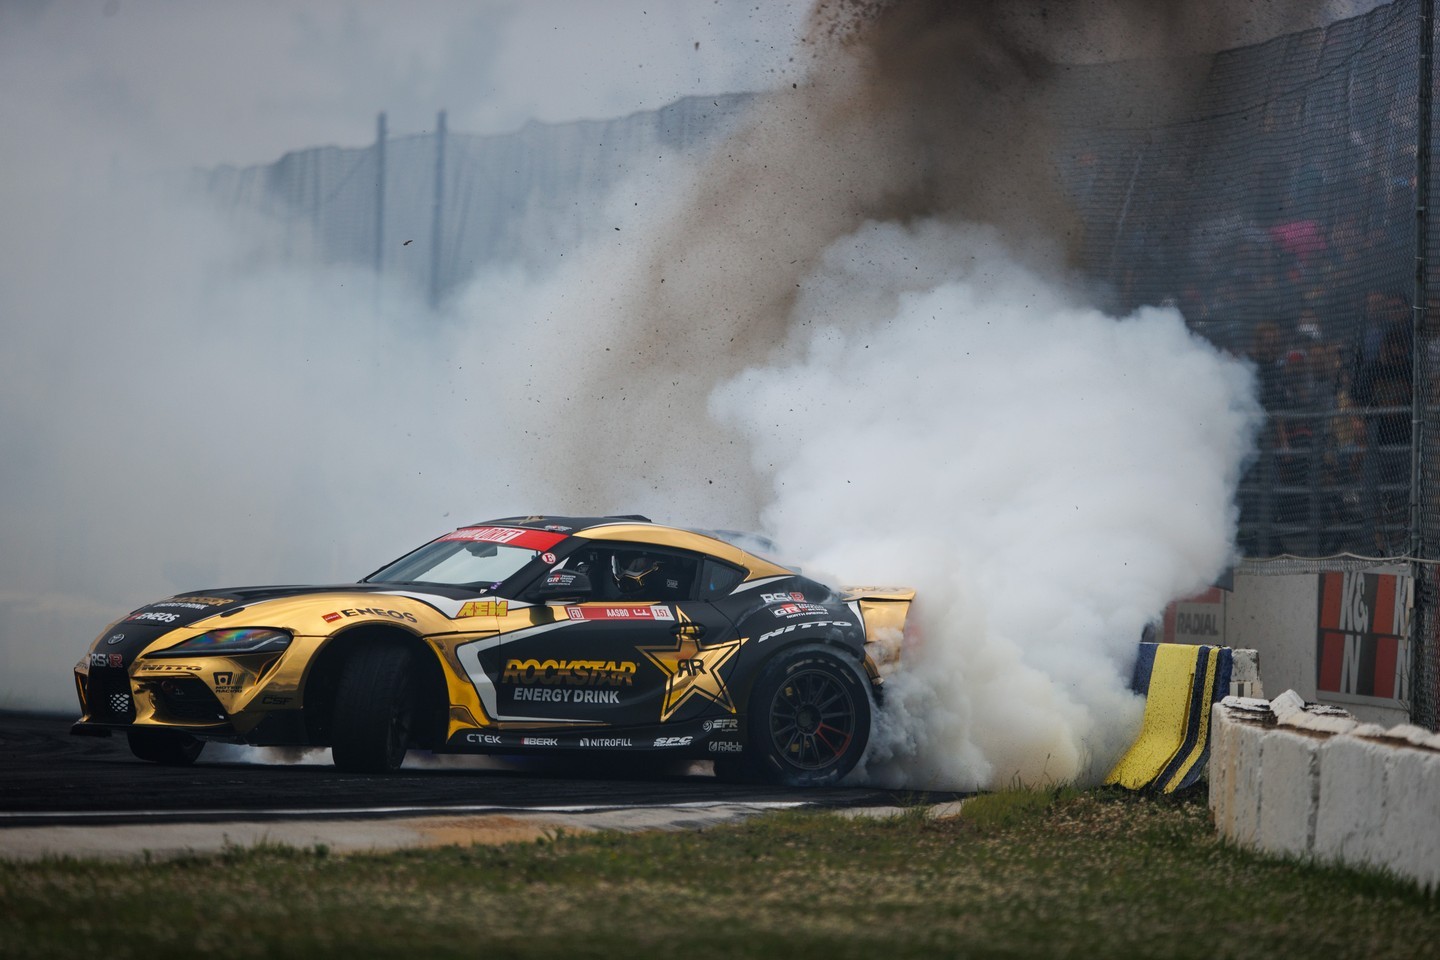 When you realize you forgot a gift for someone and it’s Christmas this weekend!
@FredricAasbo | @rockstarenergy | @NittoTire